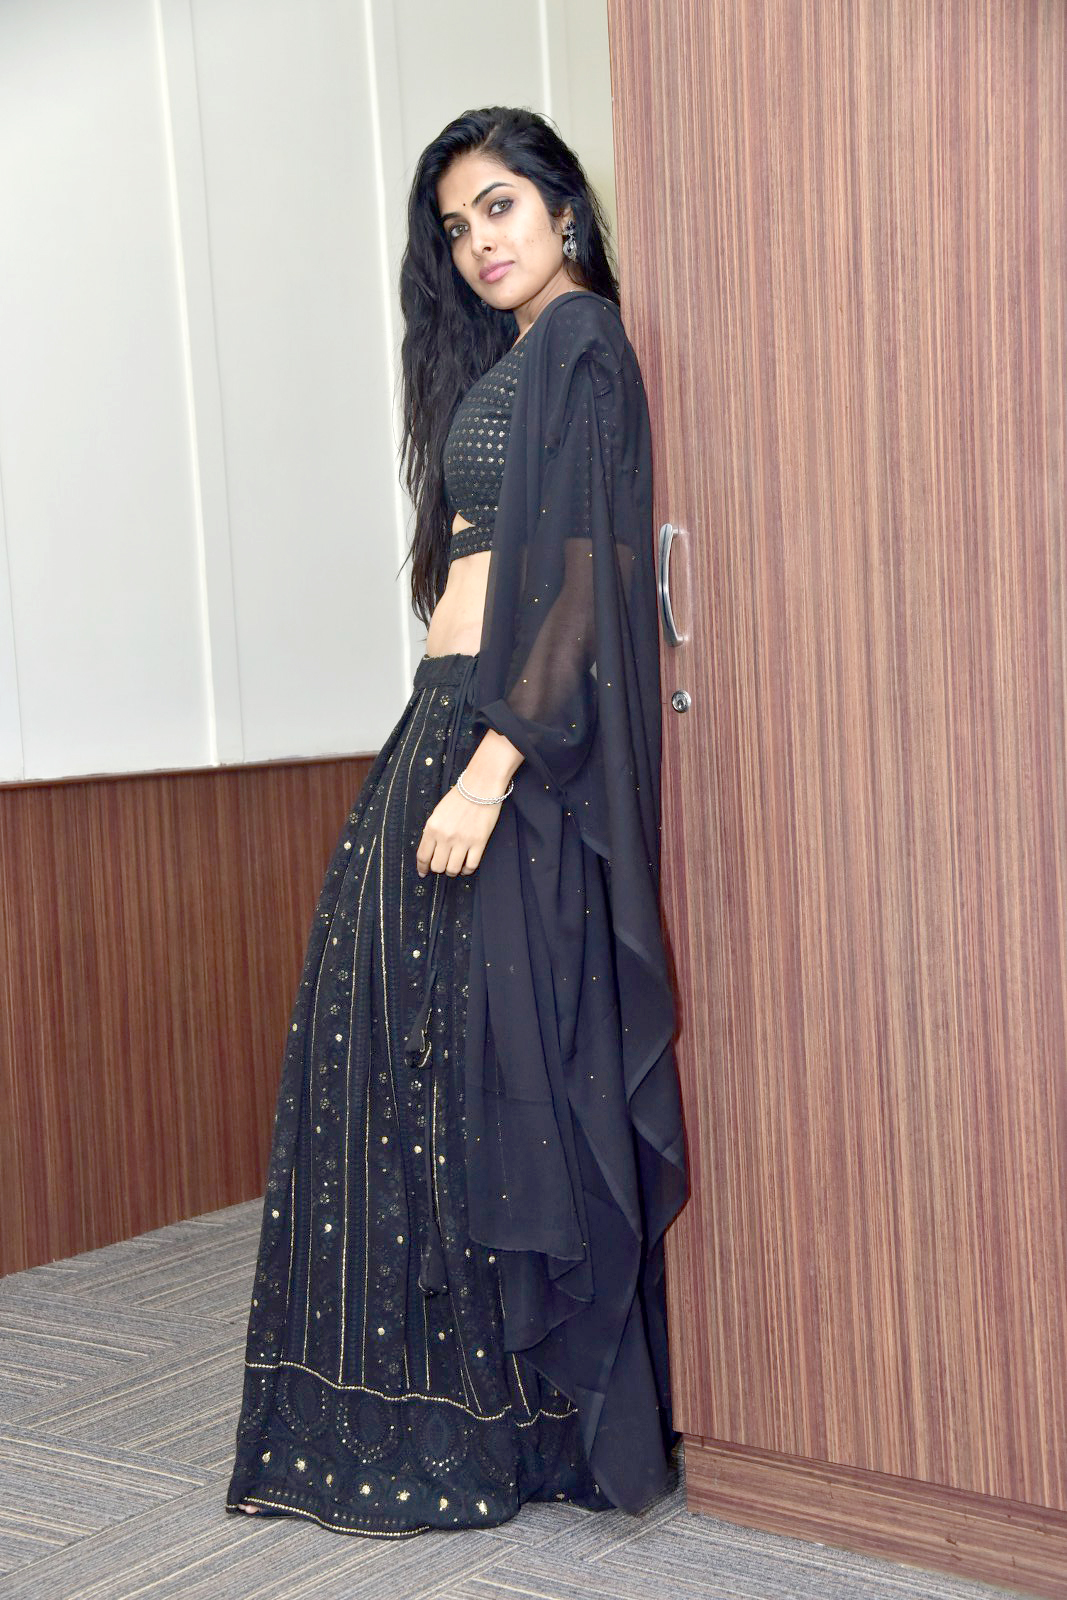 Divi Vadthya at ATM Webseries Pre Release Event